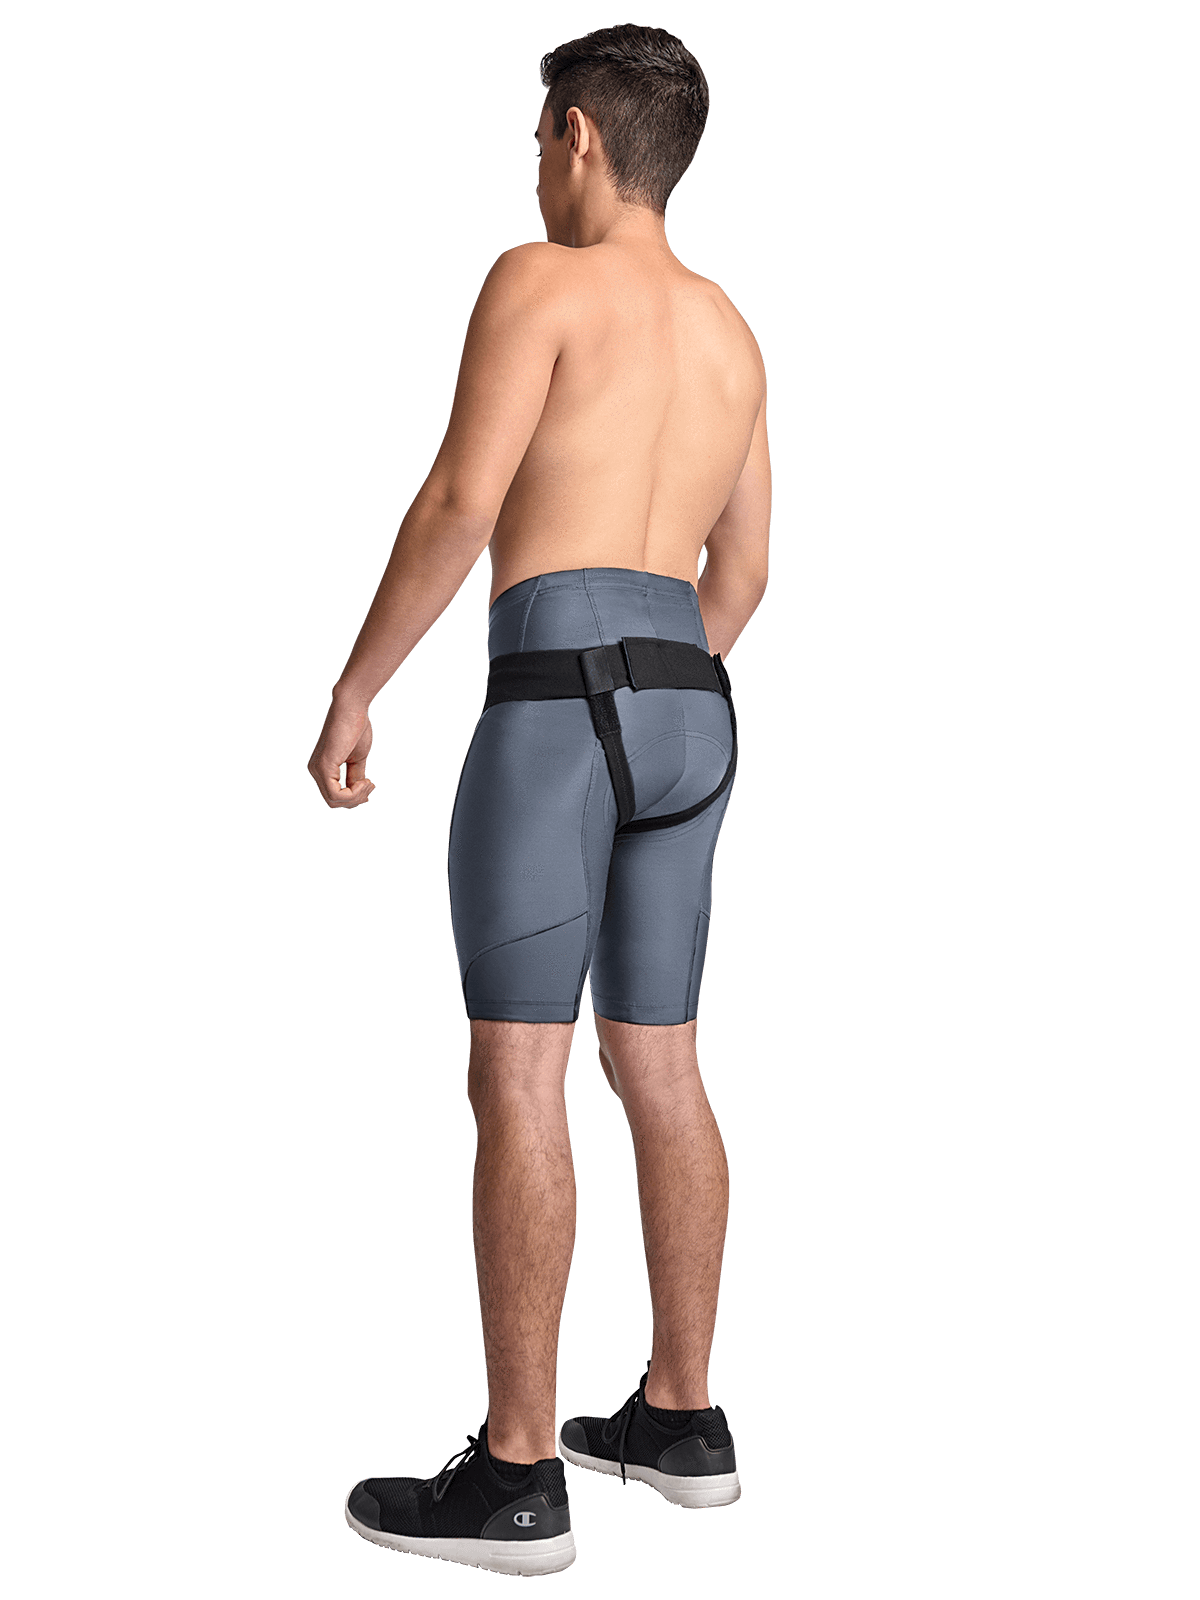 ITA-MED Hernia Support - Double Sided with Removable Inserts Beige, Beige